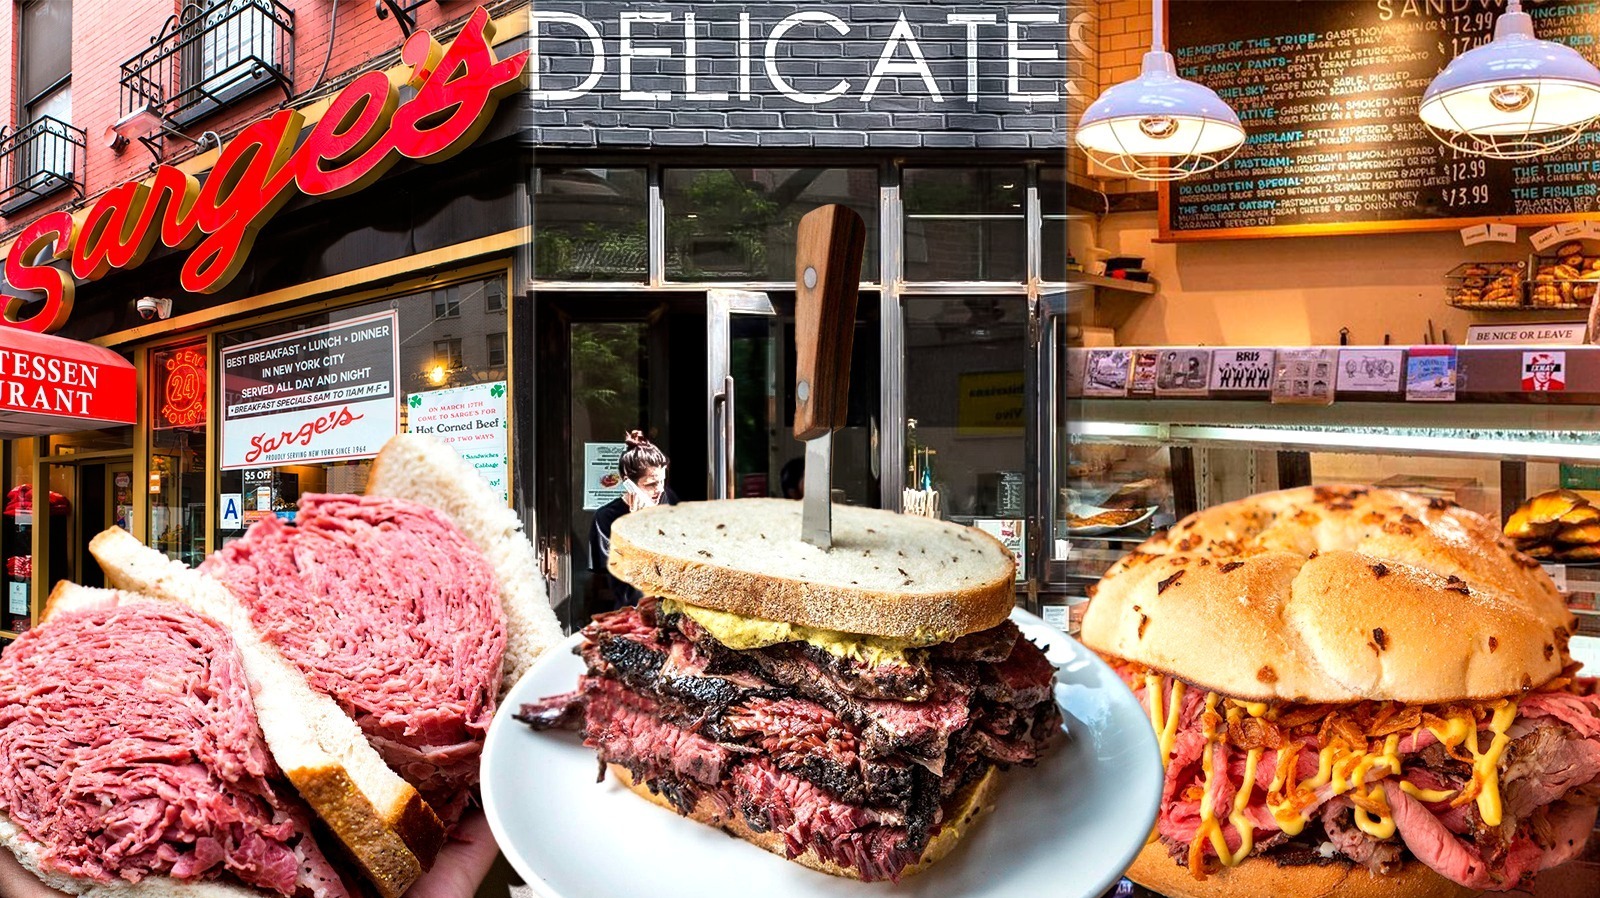 14 Best Jewish Delis In NYC, Ranked - Afpkudos